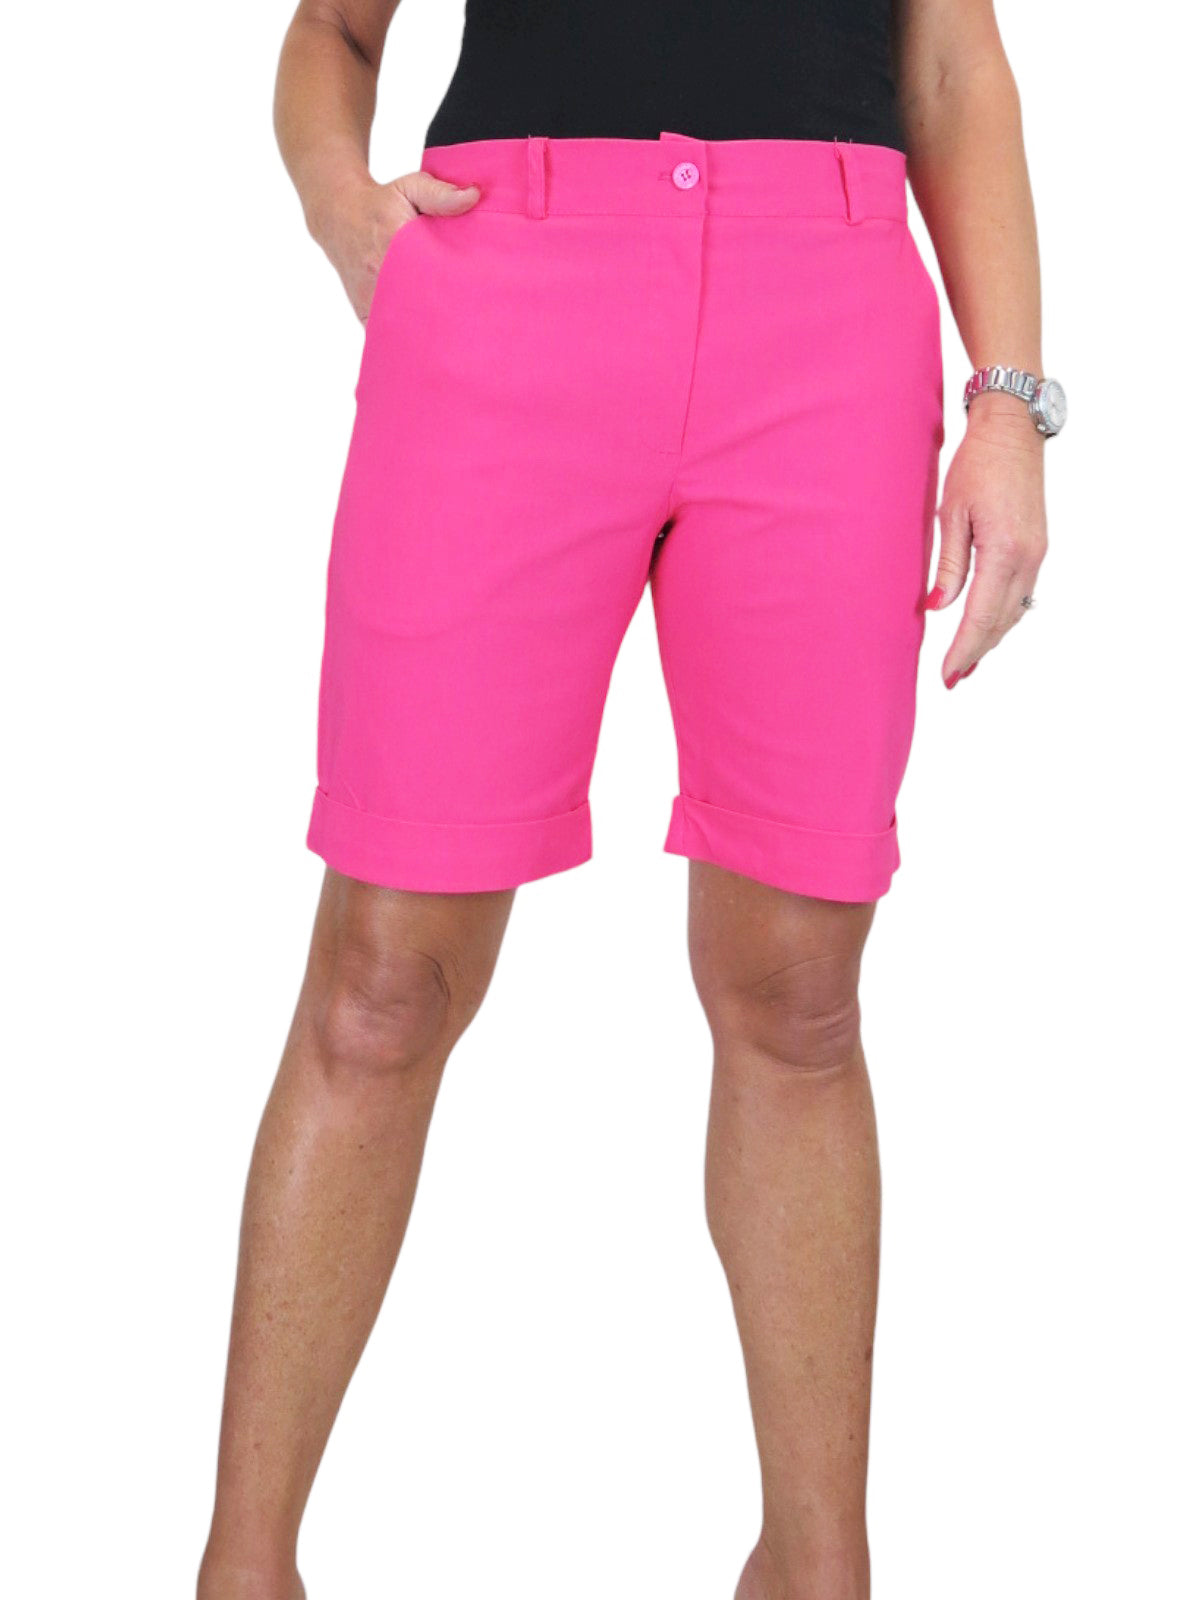 Ladies Above The Knee Stretch Shorts Hot Pink